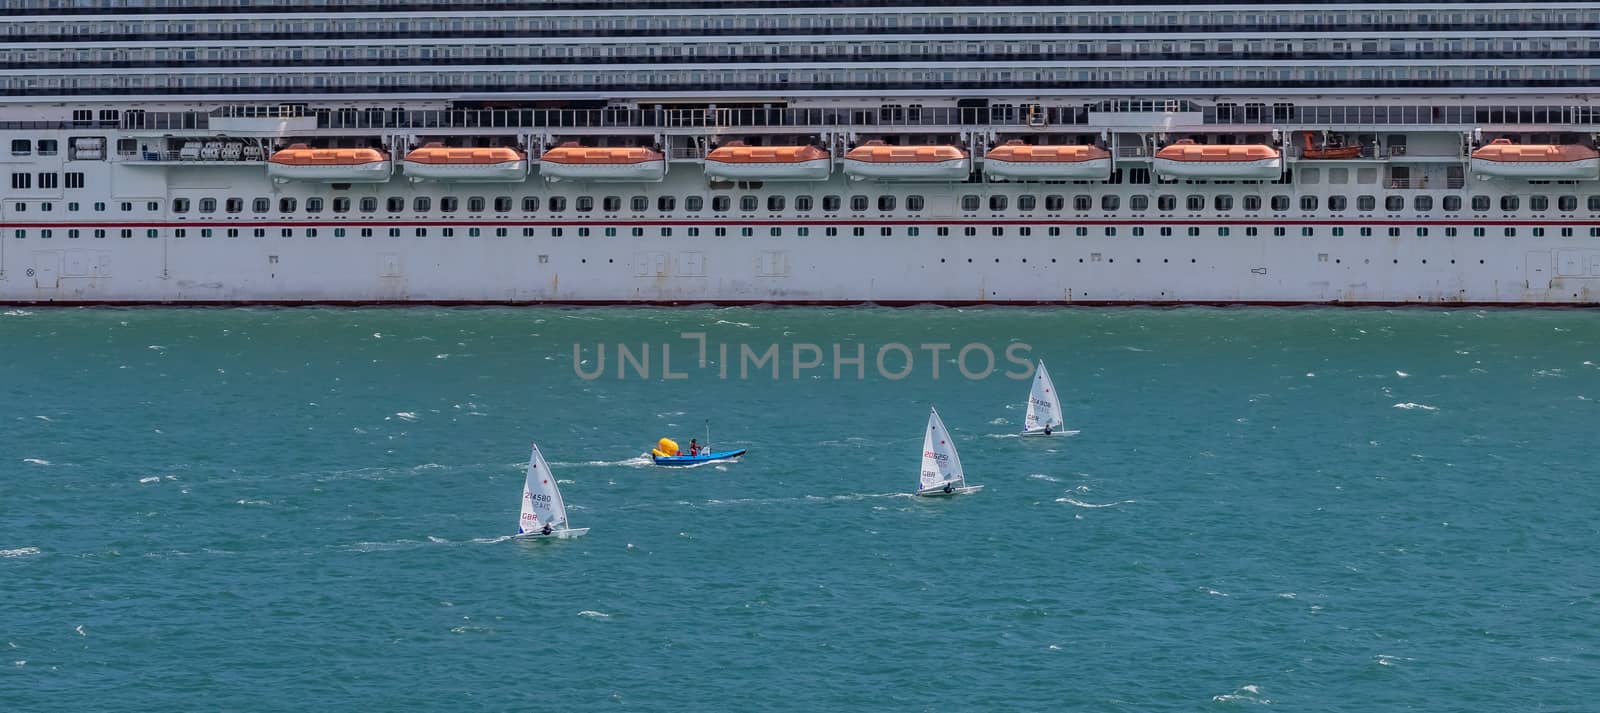 Portland harbour, United Kingdom - July 2, 2020: High Angle aerial panoramic shot of the laser class sailing racing dinghies and a rescue boat sailing by a huge cruise ship in Portland harbour.